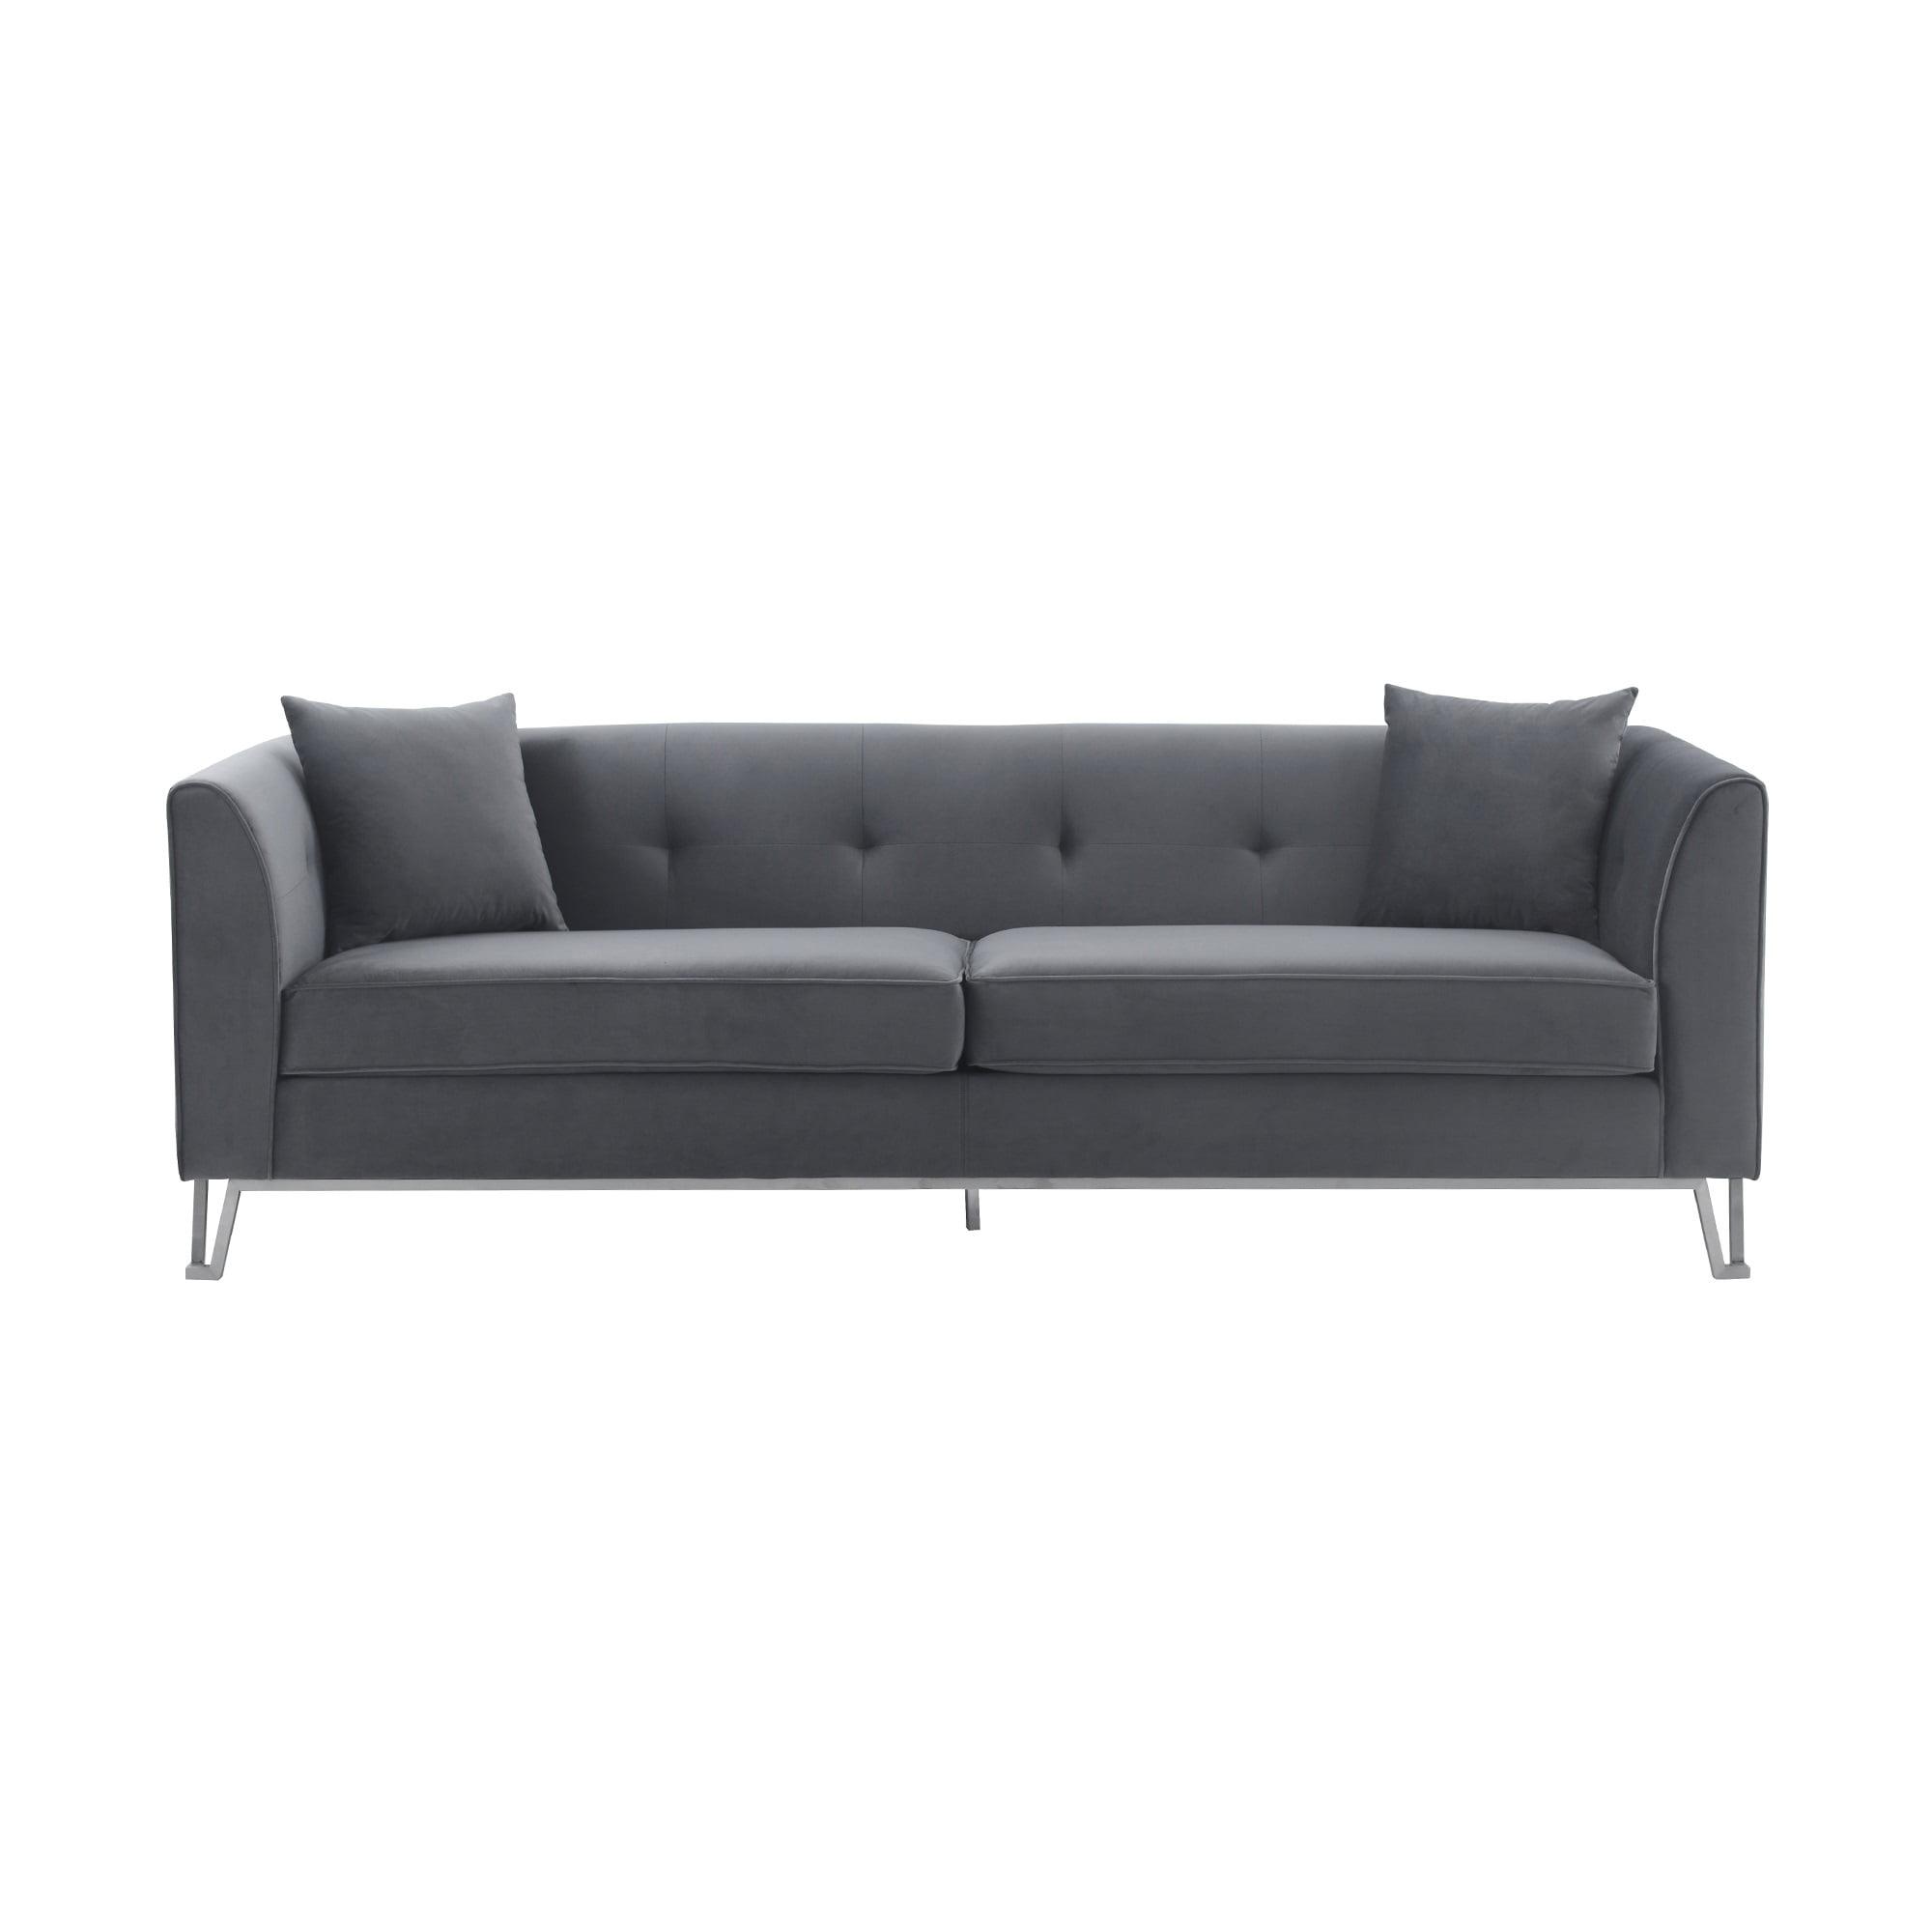 Elegant 90" Gray Leather Tufted Sofa with Wooden Accents